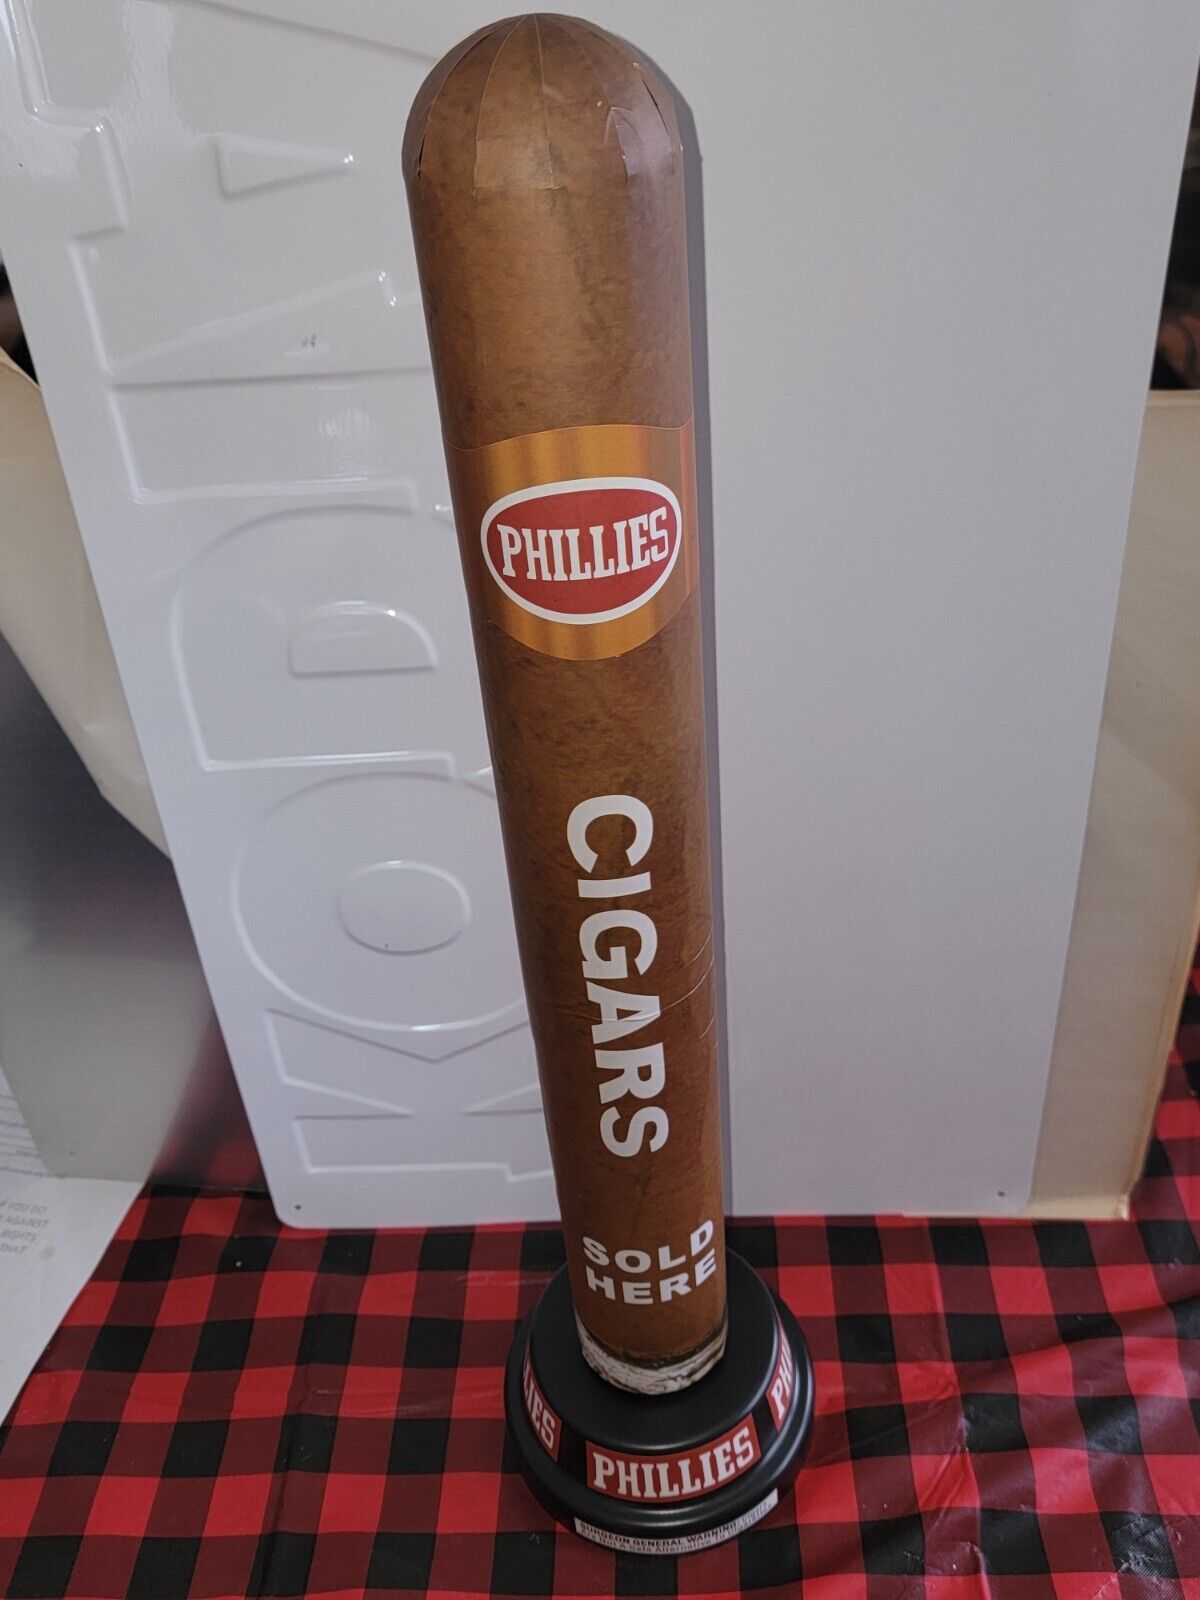 Phillies Cigars Sold Here Tobacco Store Countertop / Wall  Display Sign